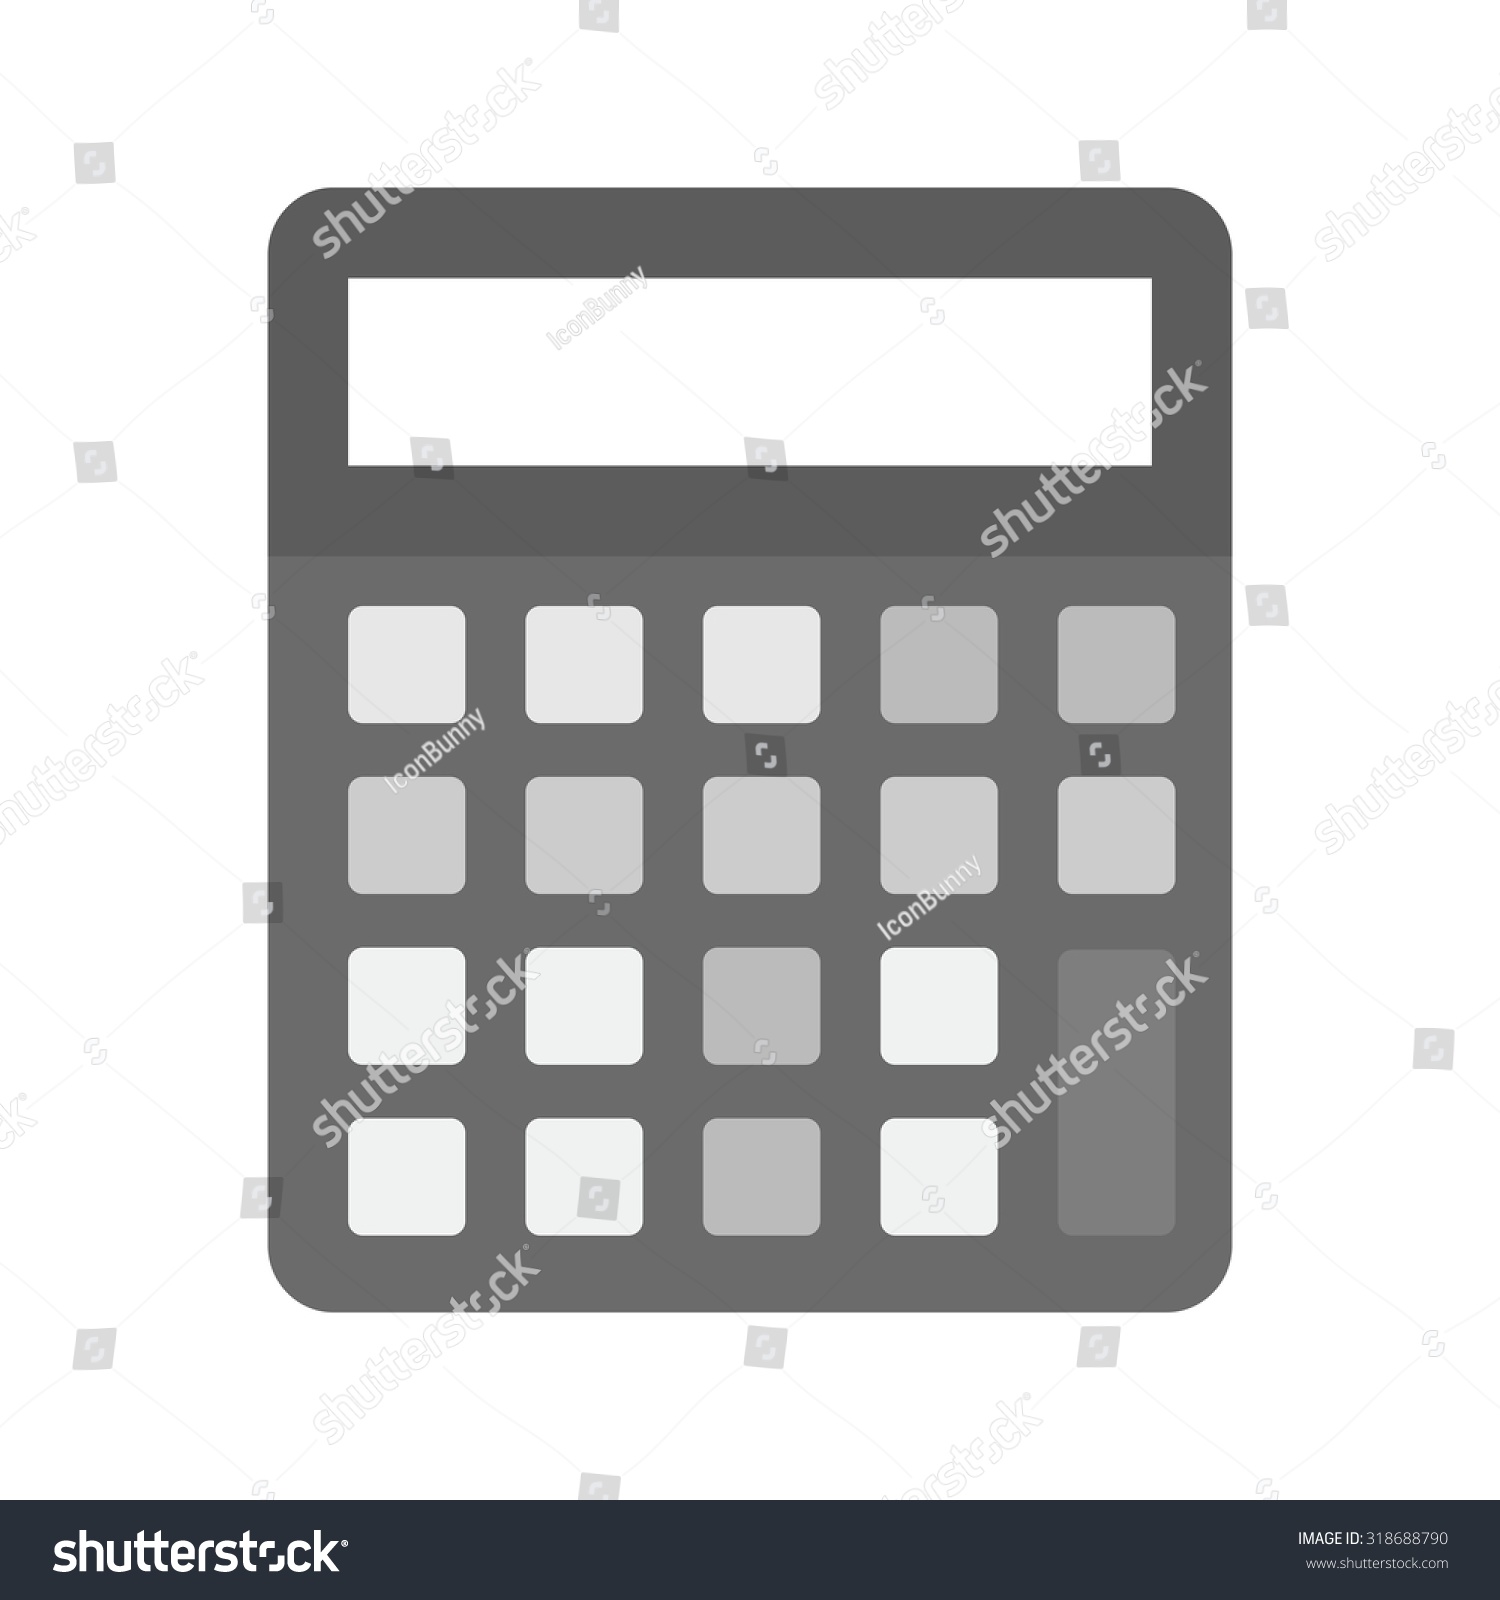 Calculator, count, electronic icon vector image. Can also be used for business, finance and accounts. Suitable for web apps, mobile apps and print media. #318688790